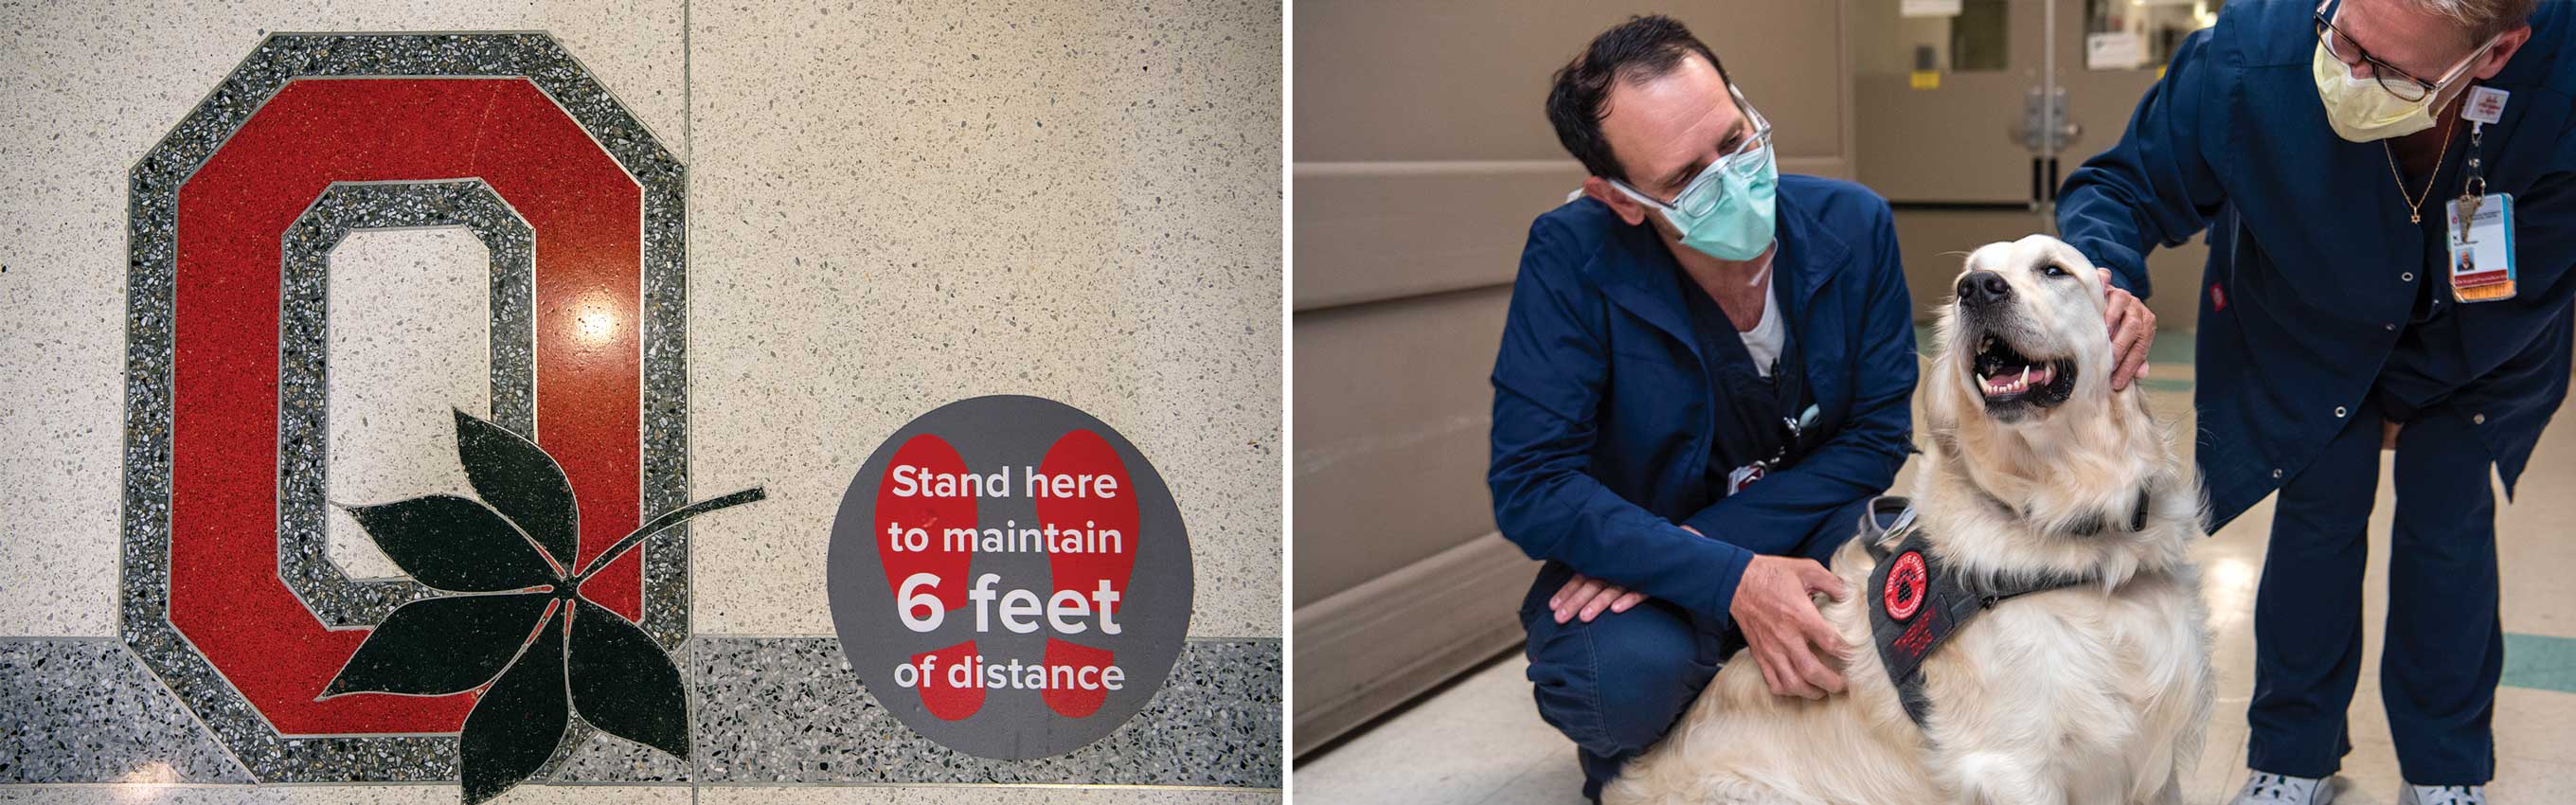 Six feet apart signs on floors at Ohio State and providers with a therapy dog at the hospital